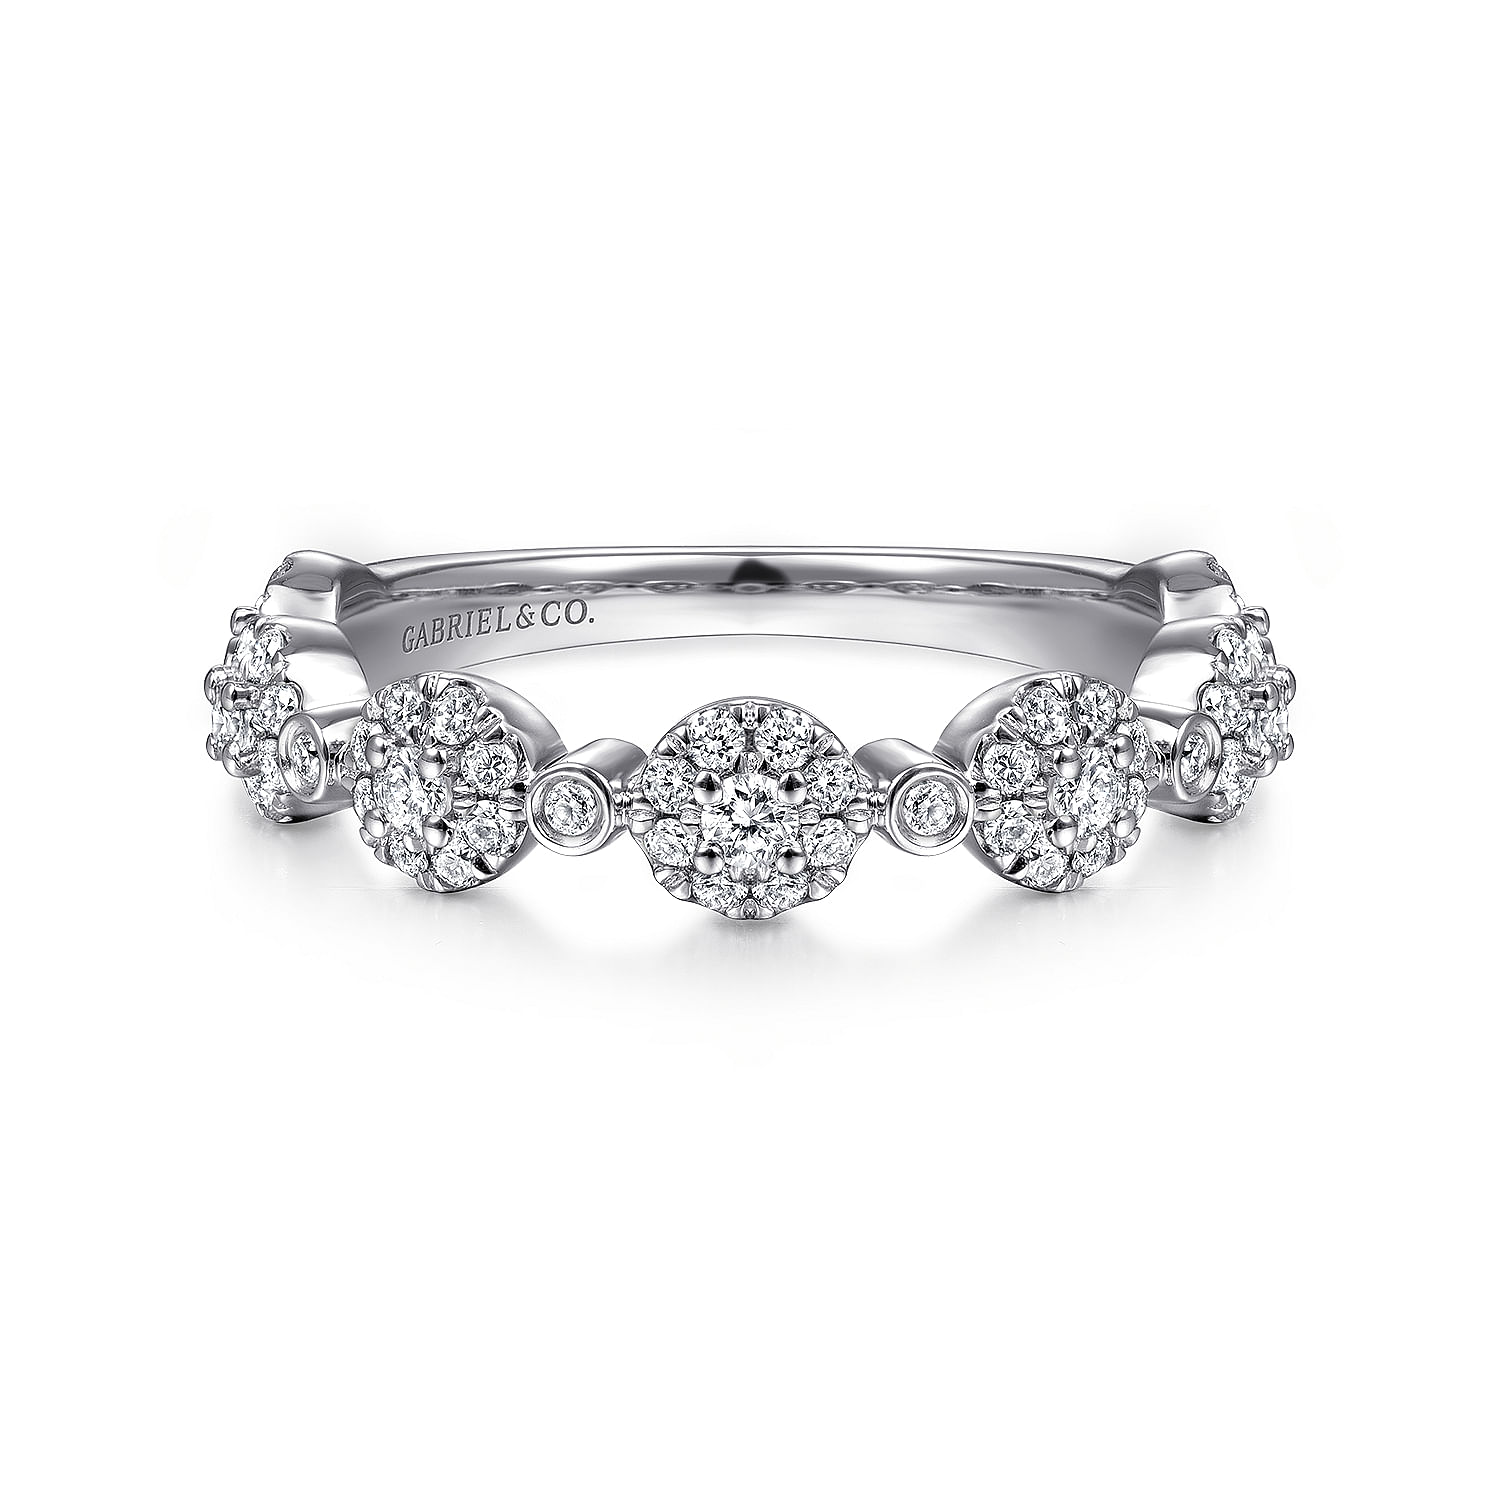 14K-White-Gold-Diamond-Pave-Station-Stackable-Ring1